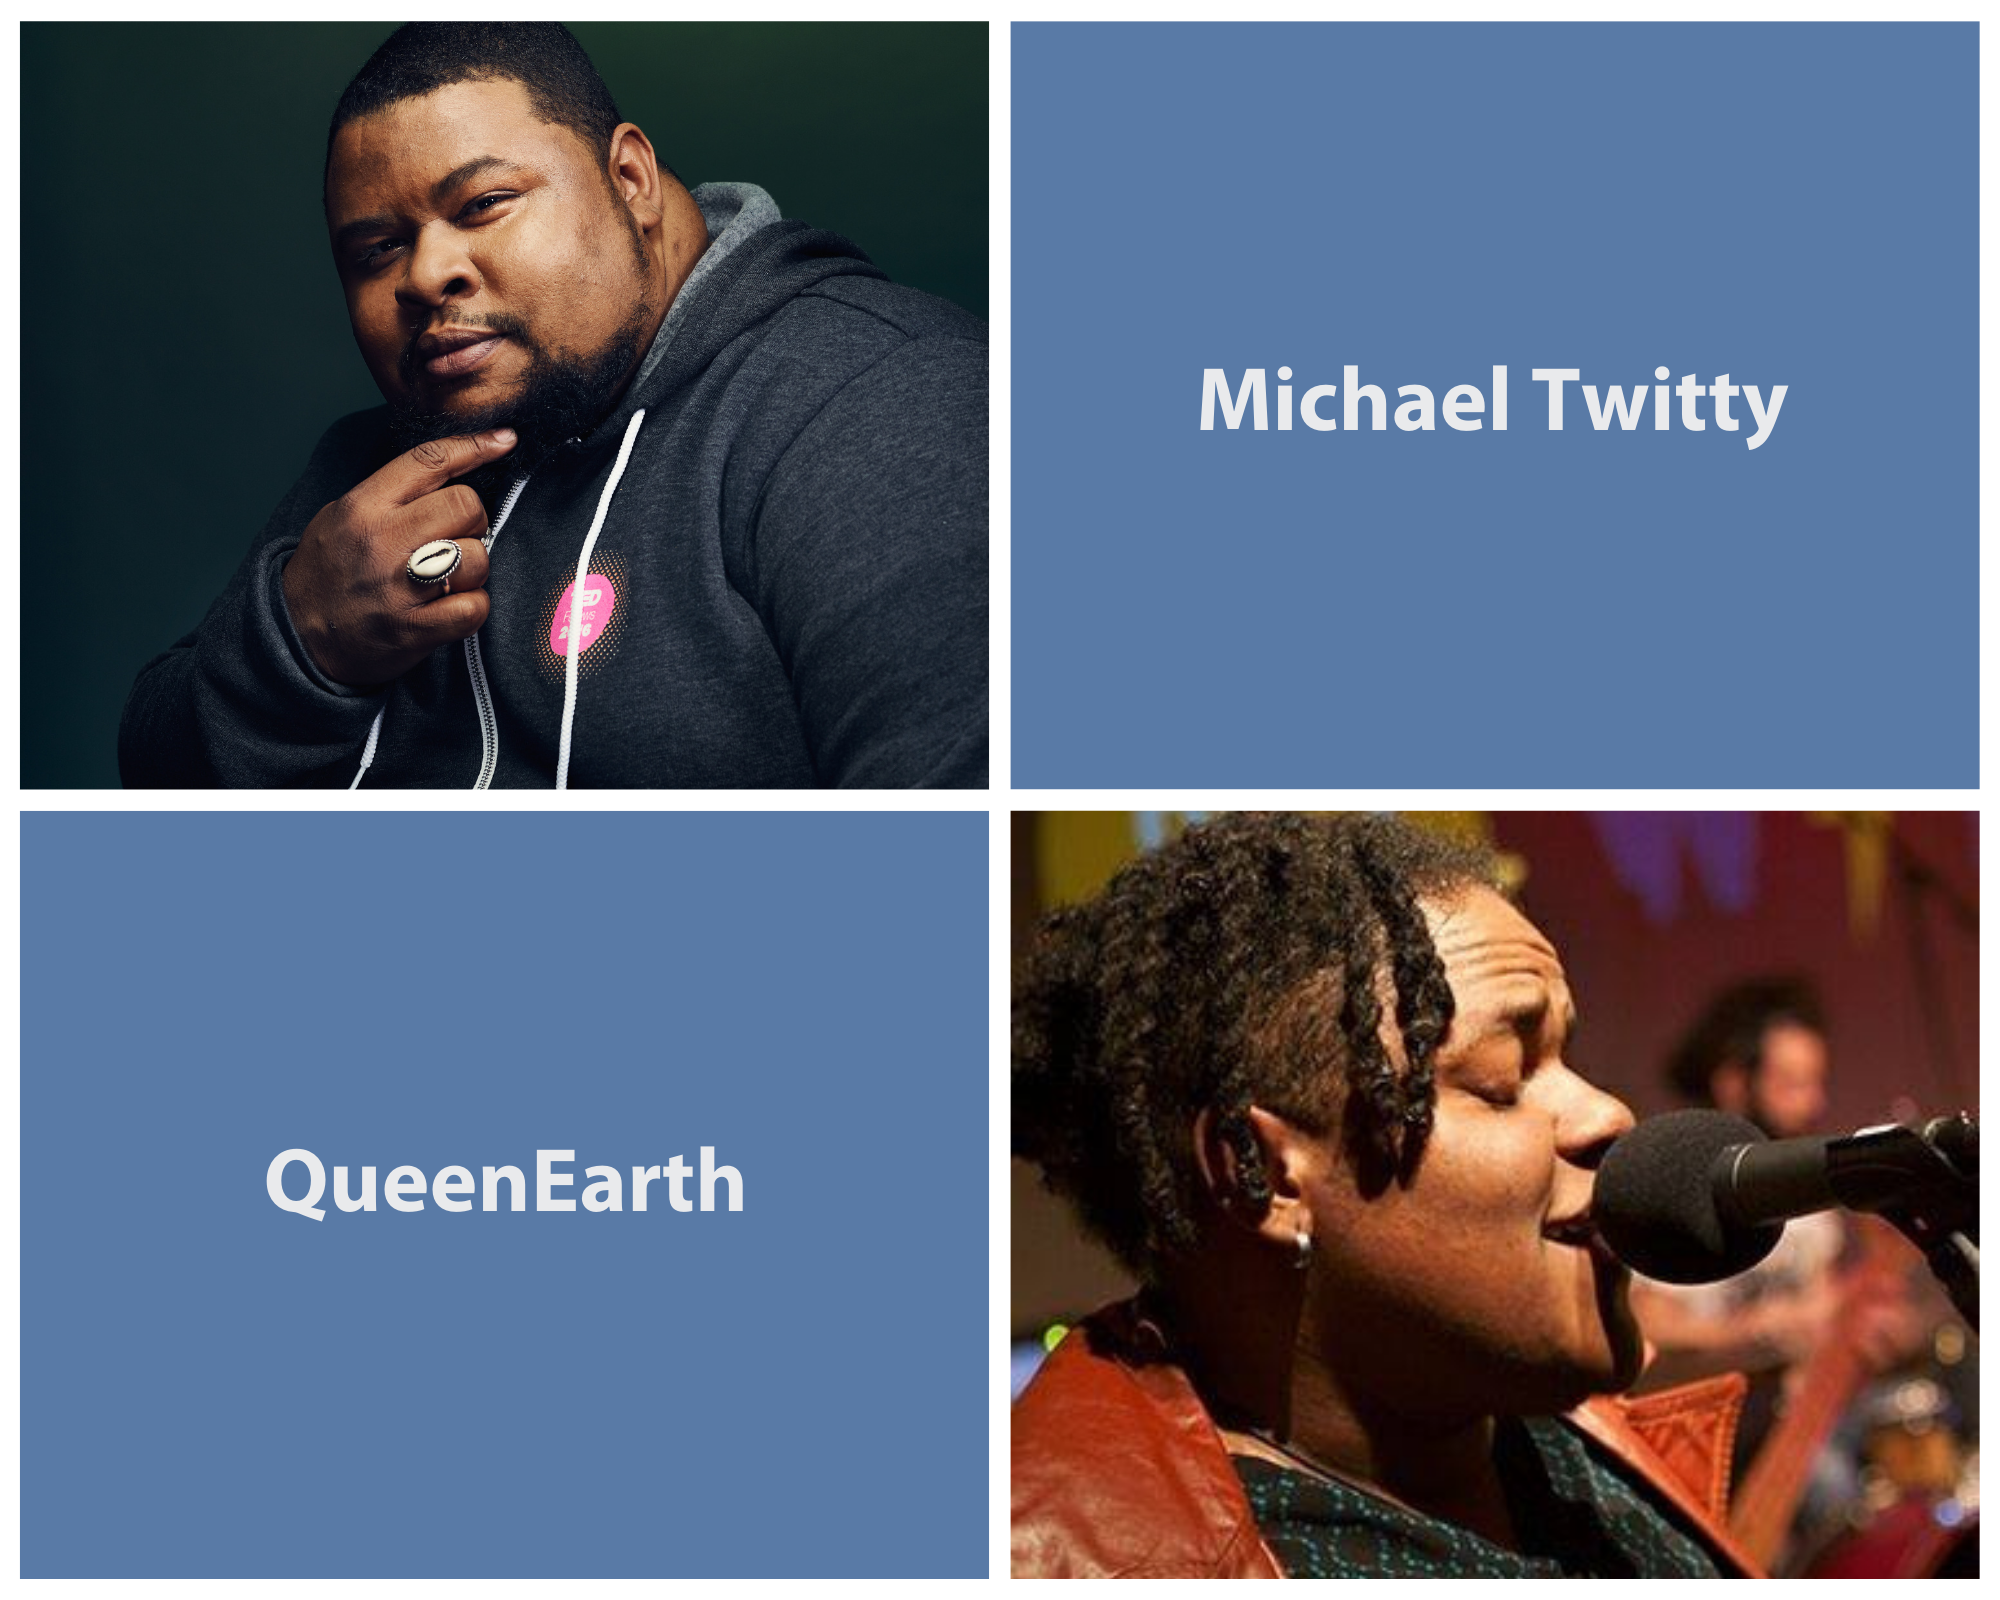 MEDIA ADVISORY: An Evening with FEA, Michael Twitty, and QueenEarth